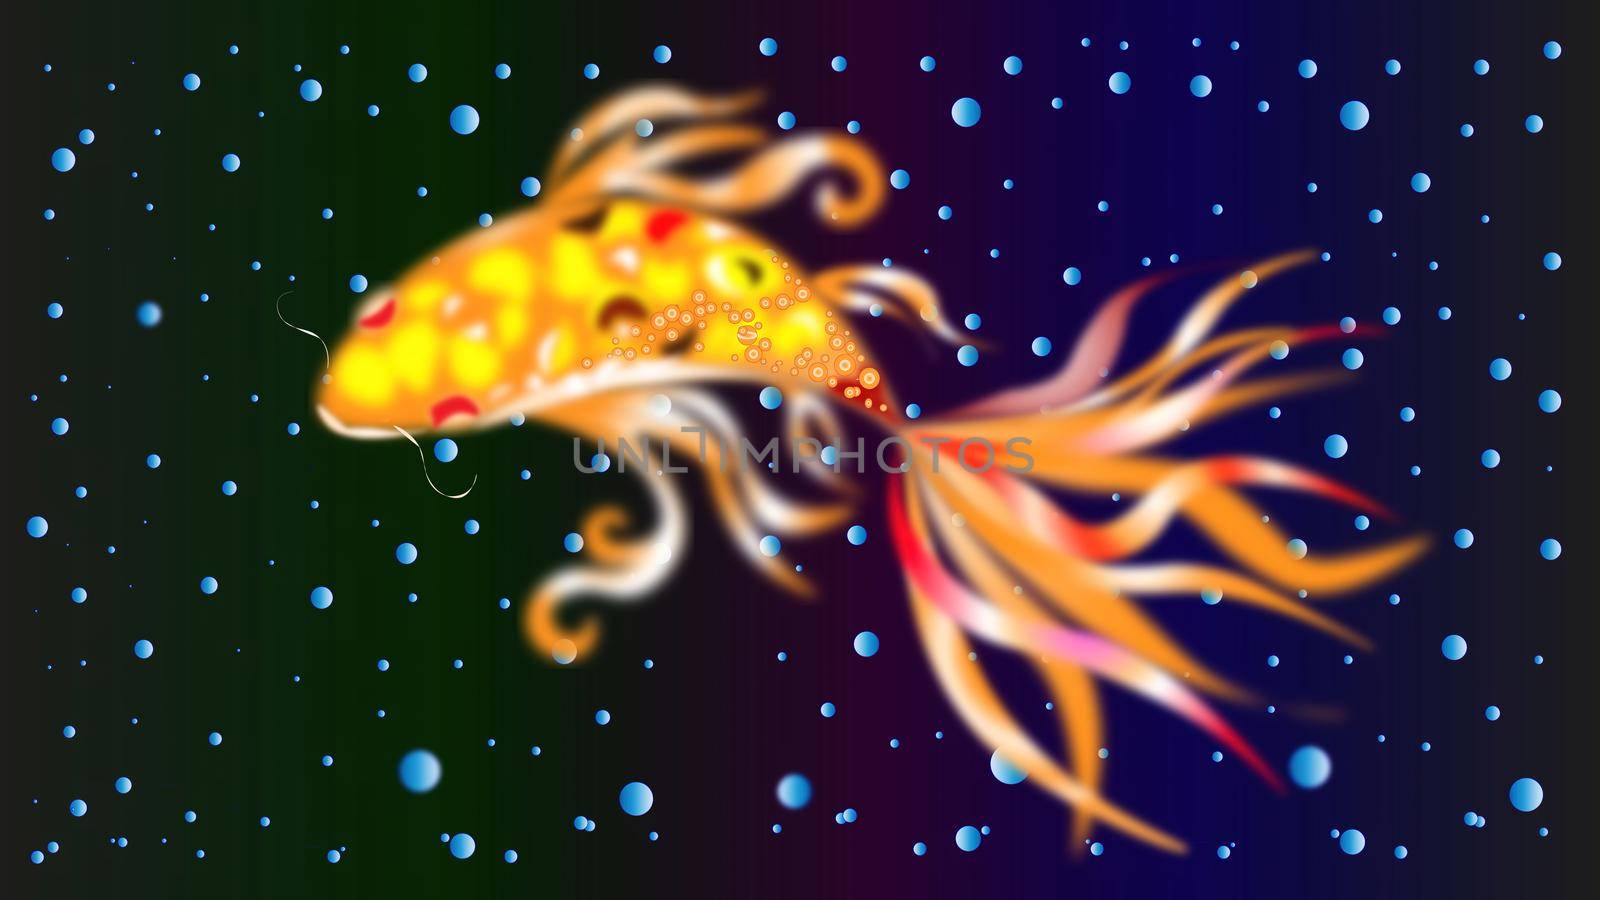 Glowing goldfish. In the depths of dark waters a golden fish of well-being swims. Air bubbles in water rise up. by Nickstock